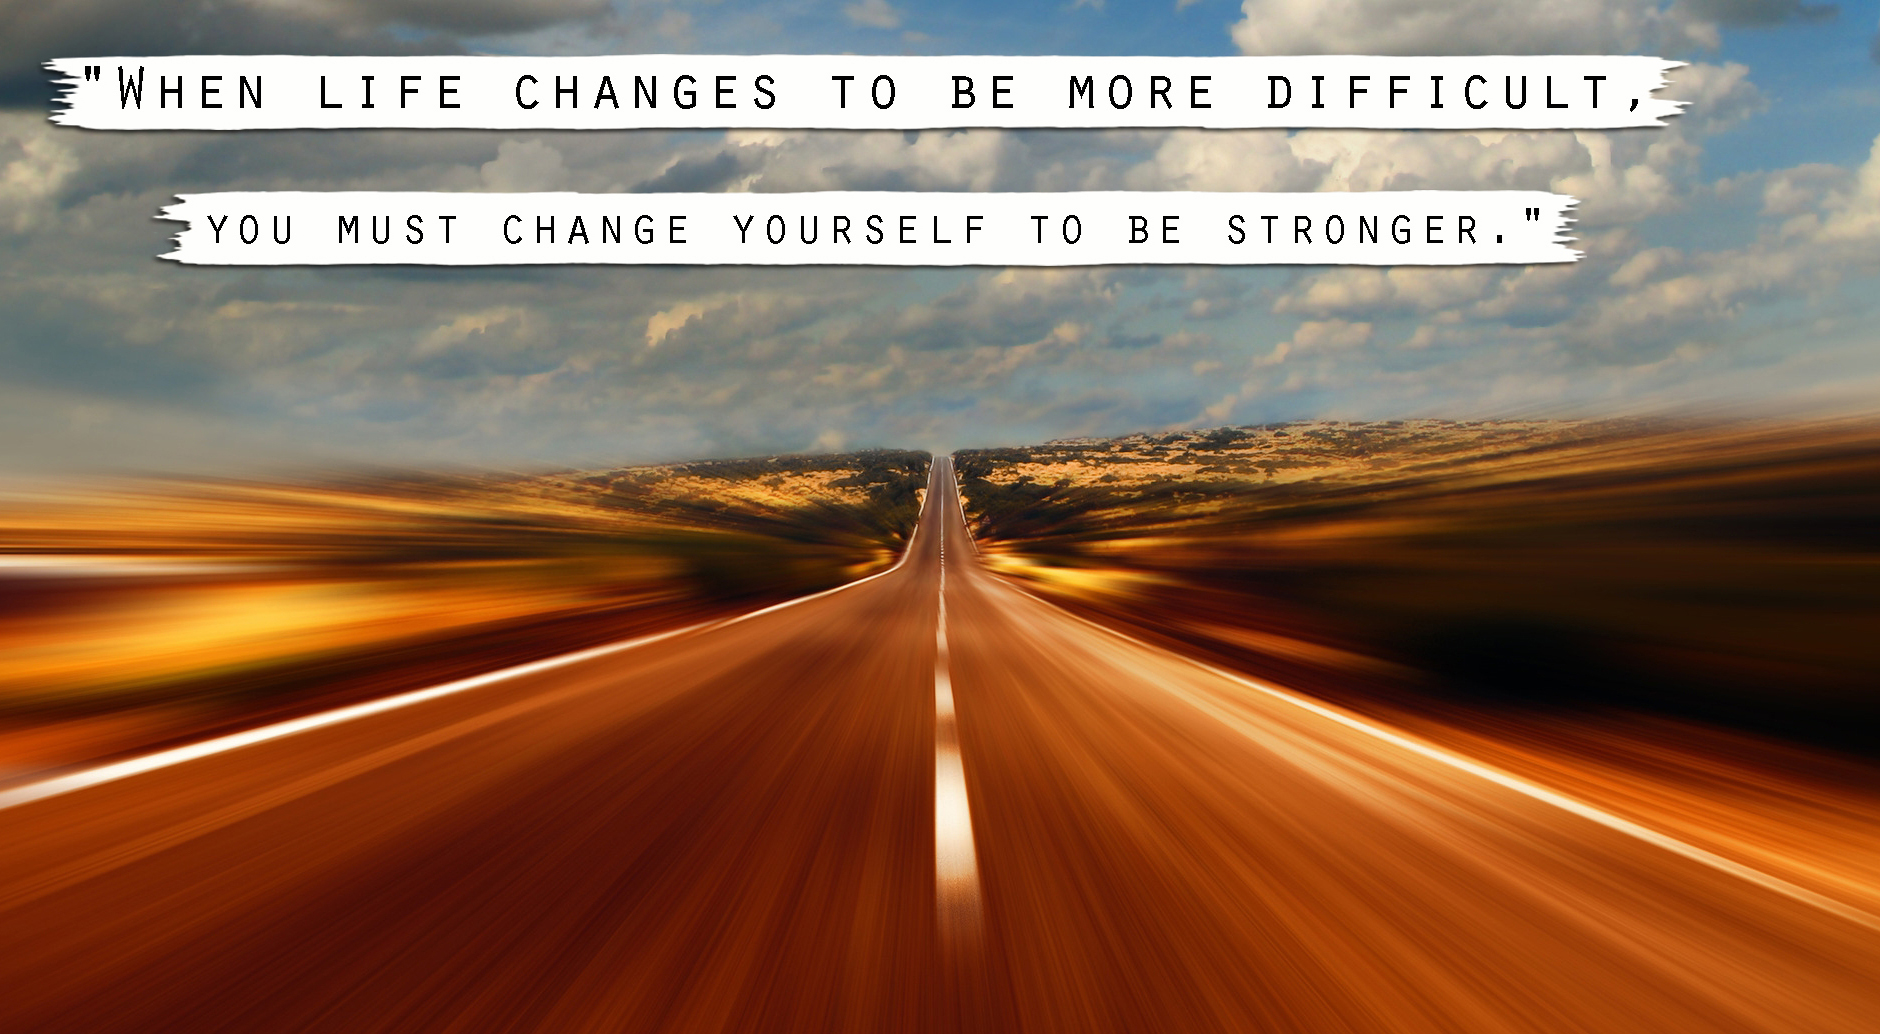 When Change is Difficult